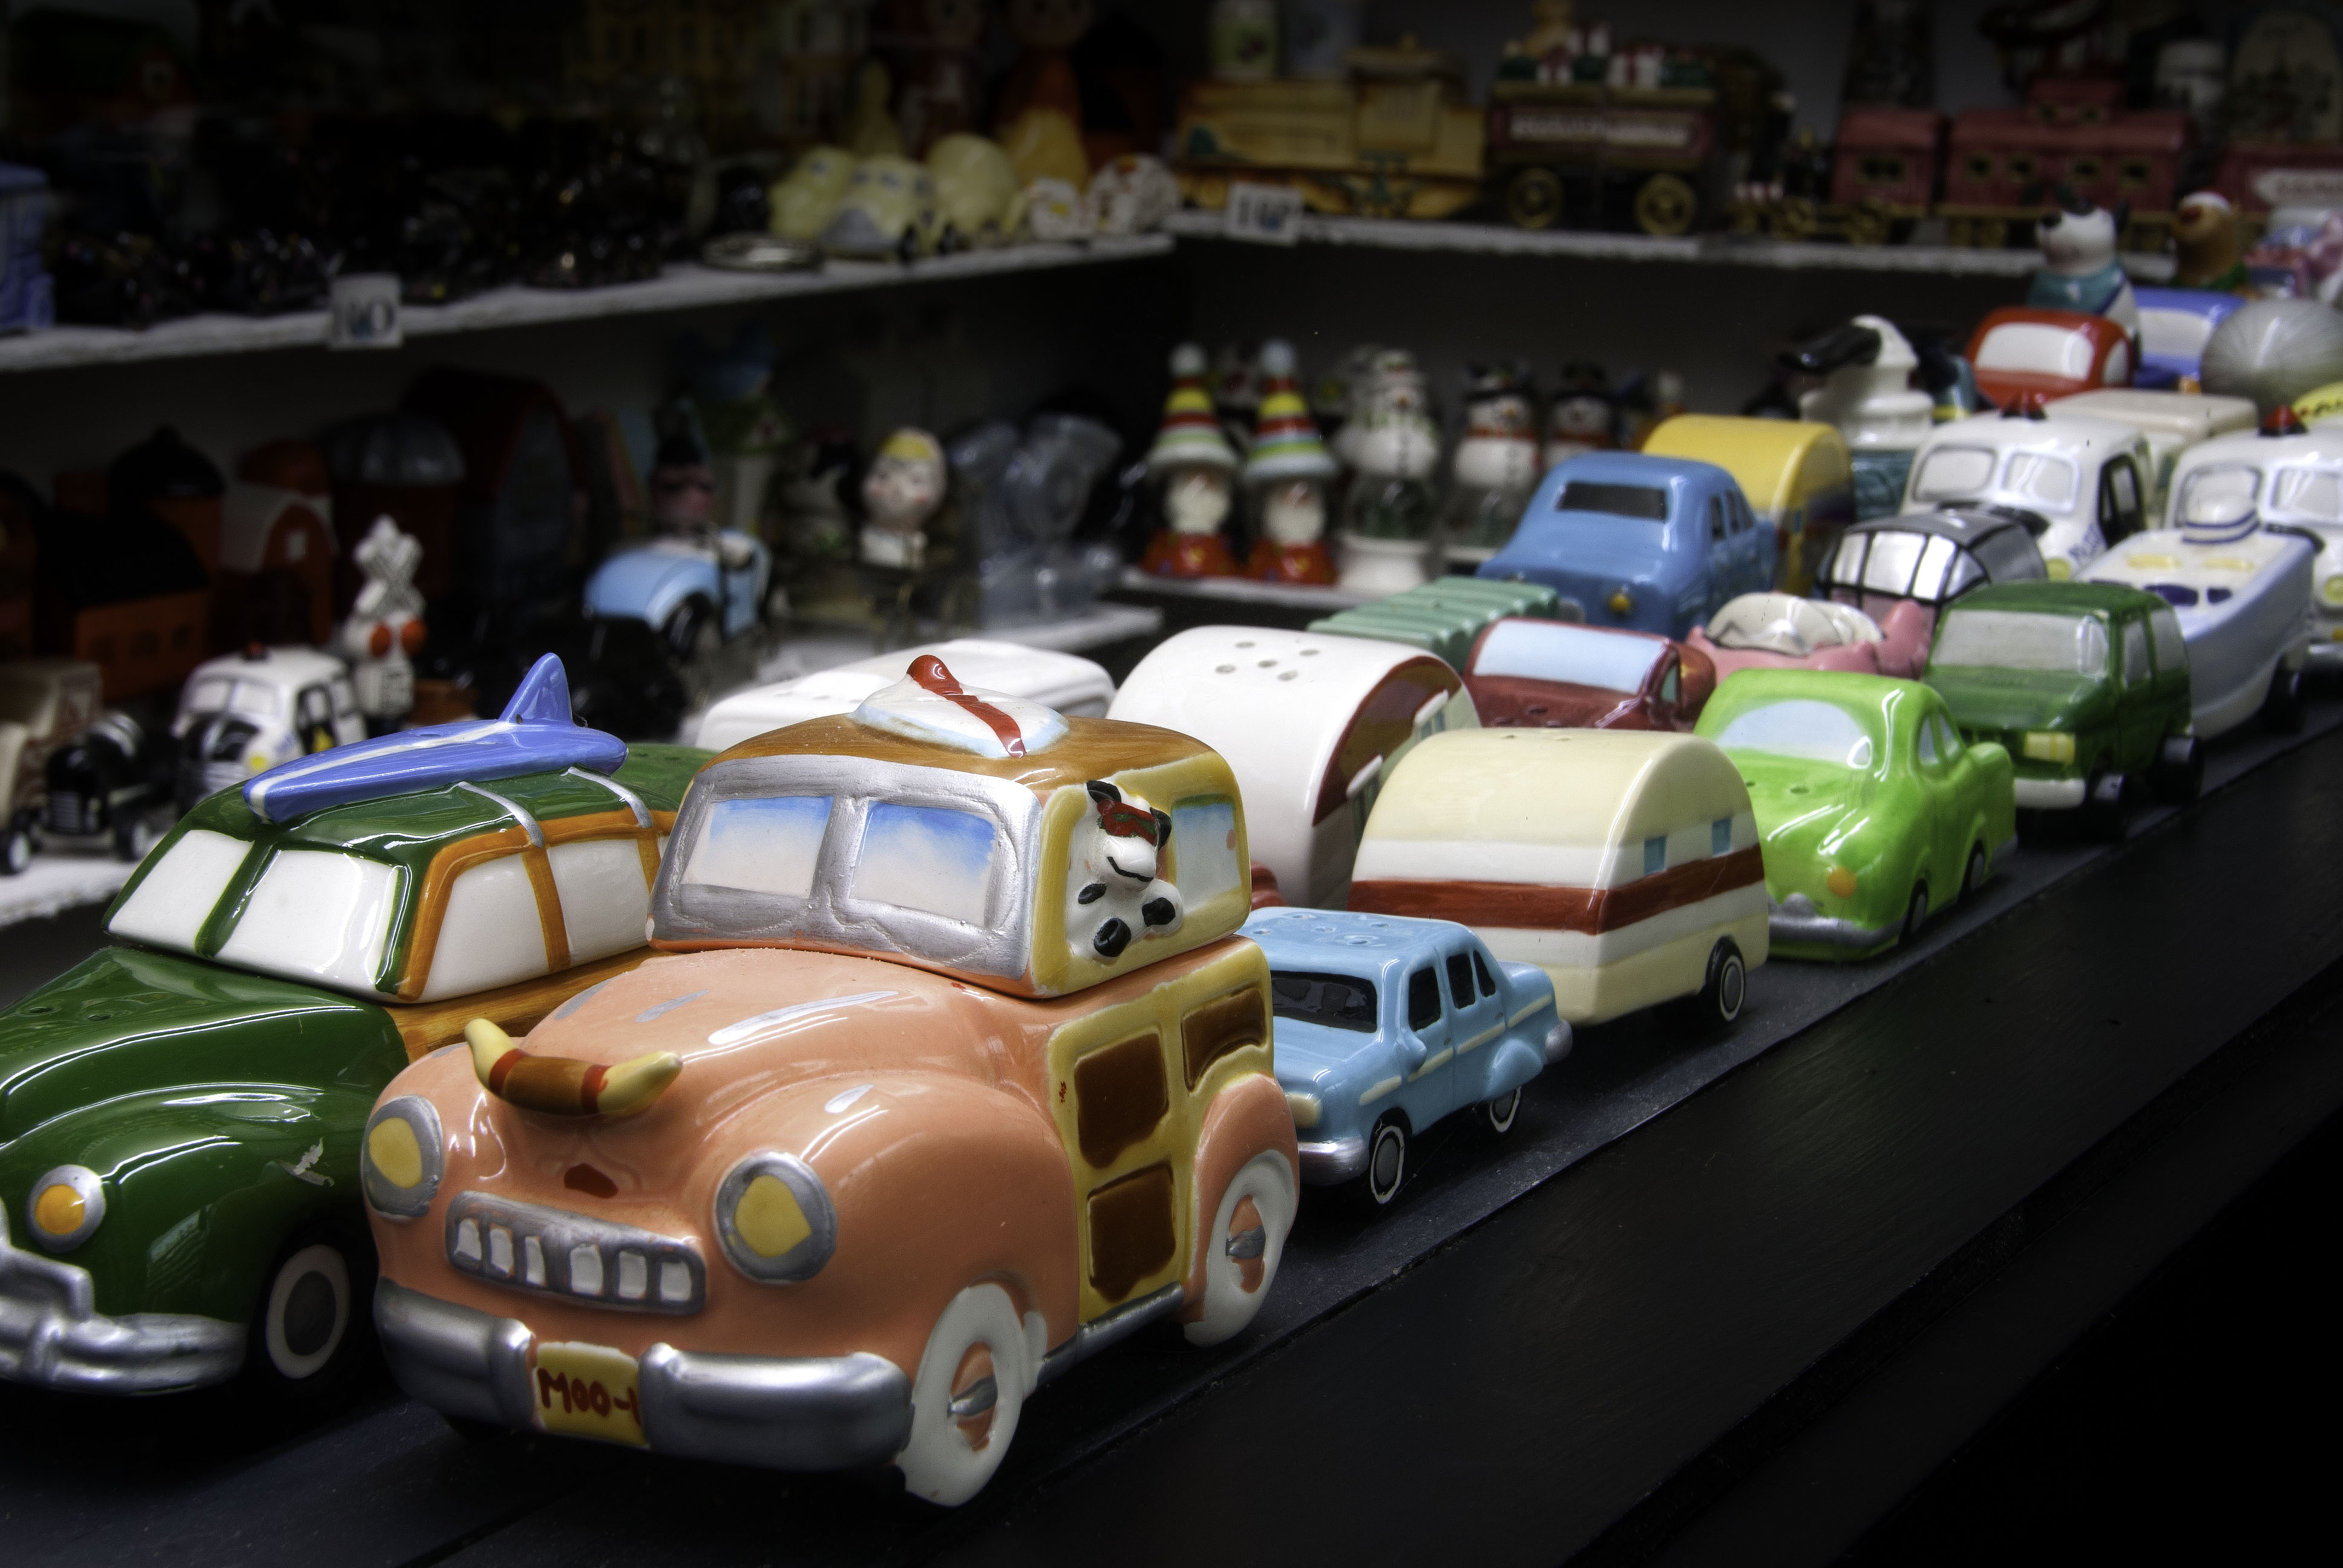 The Salt and Pepper Shaker Museum